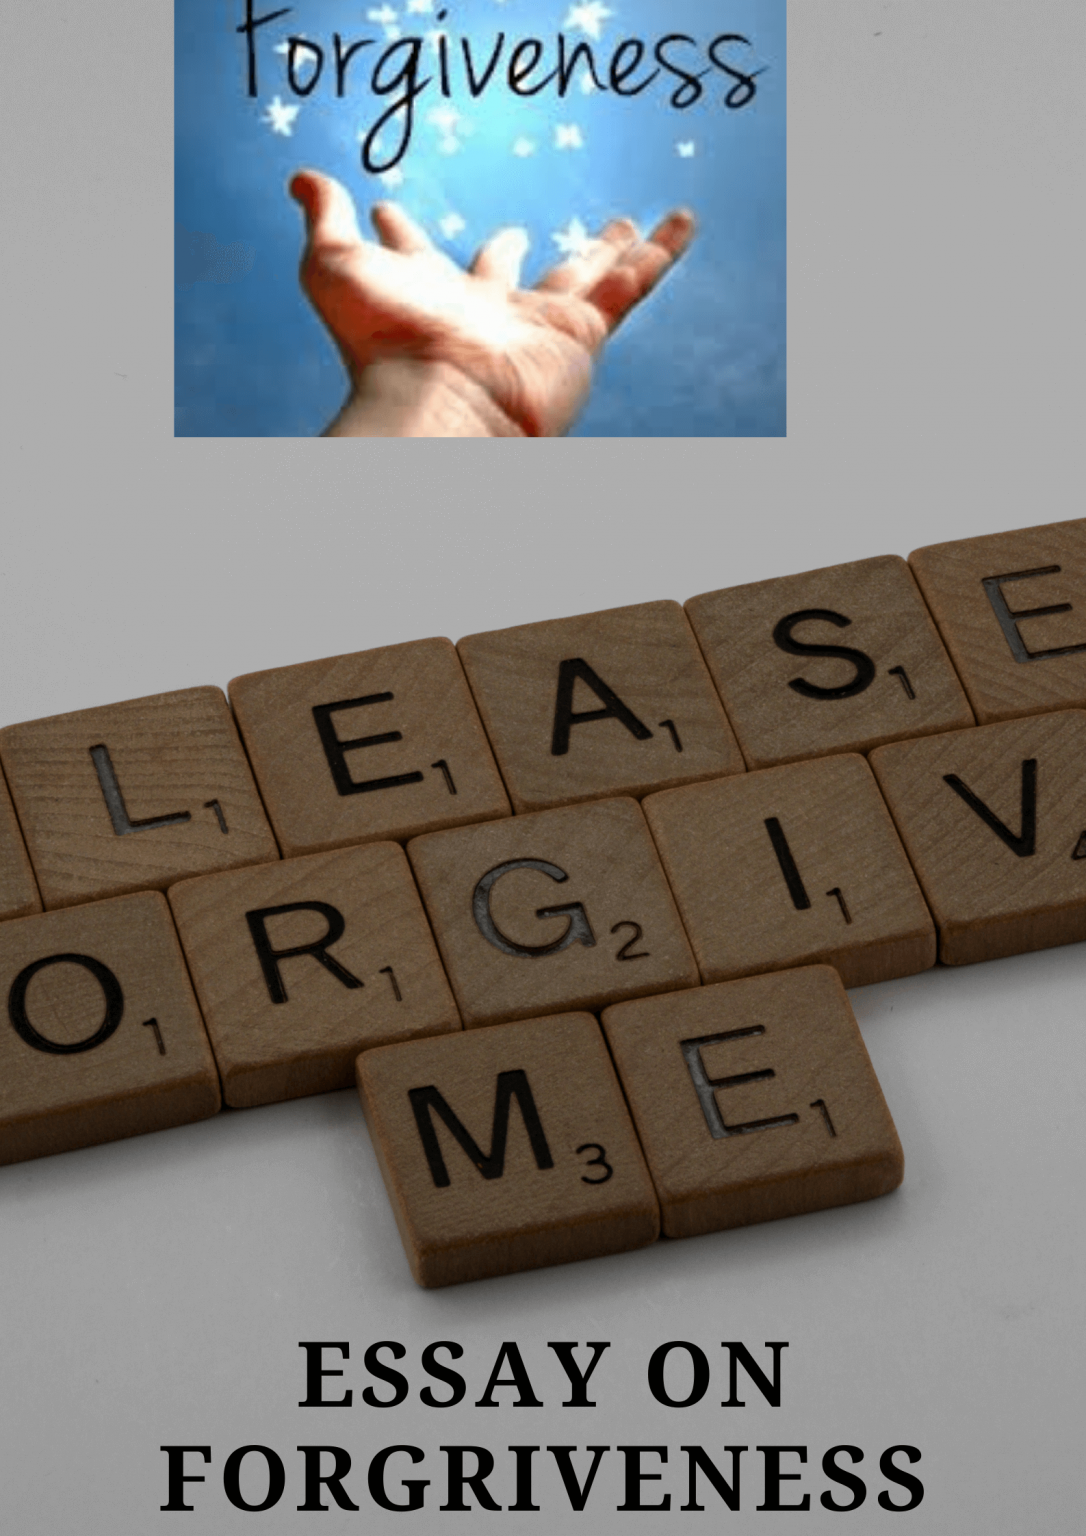 essay on importance of forgiveness